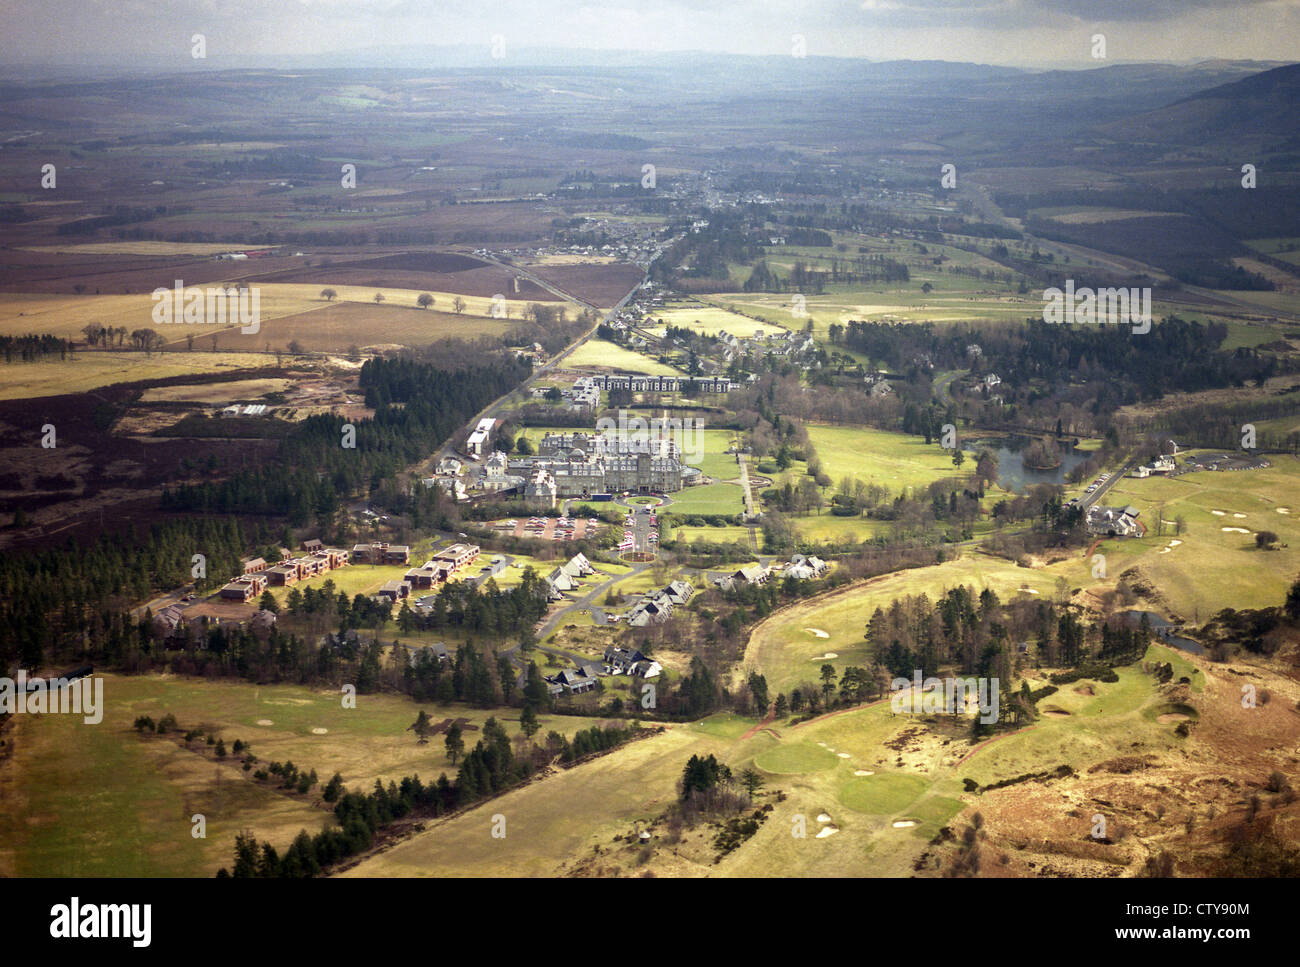 aerial image of Gleneagles golf course and hotel, Scotland, UK Stock Photo